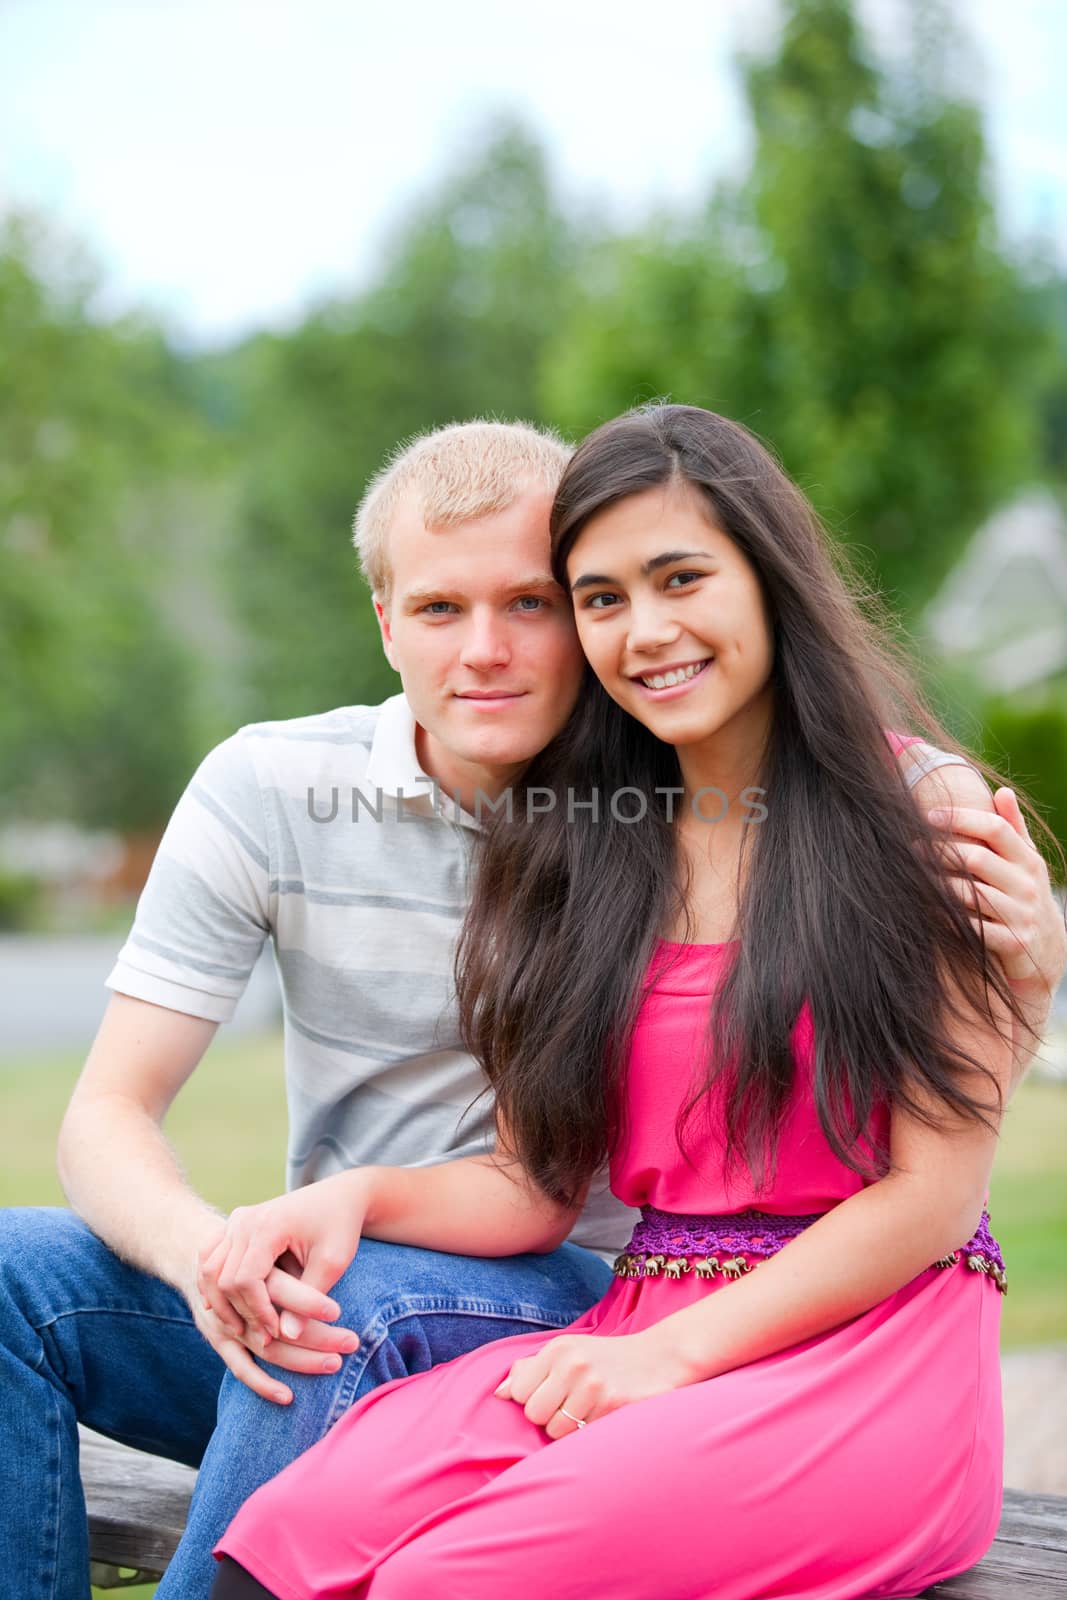 Young,  happy diverse couple sitting together outdoors